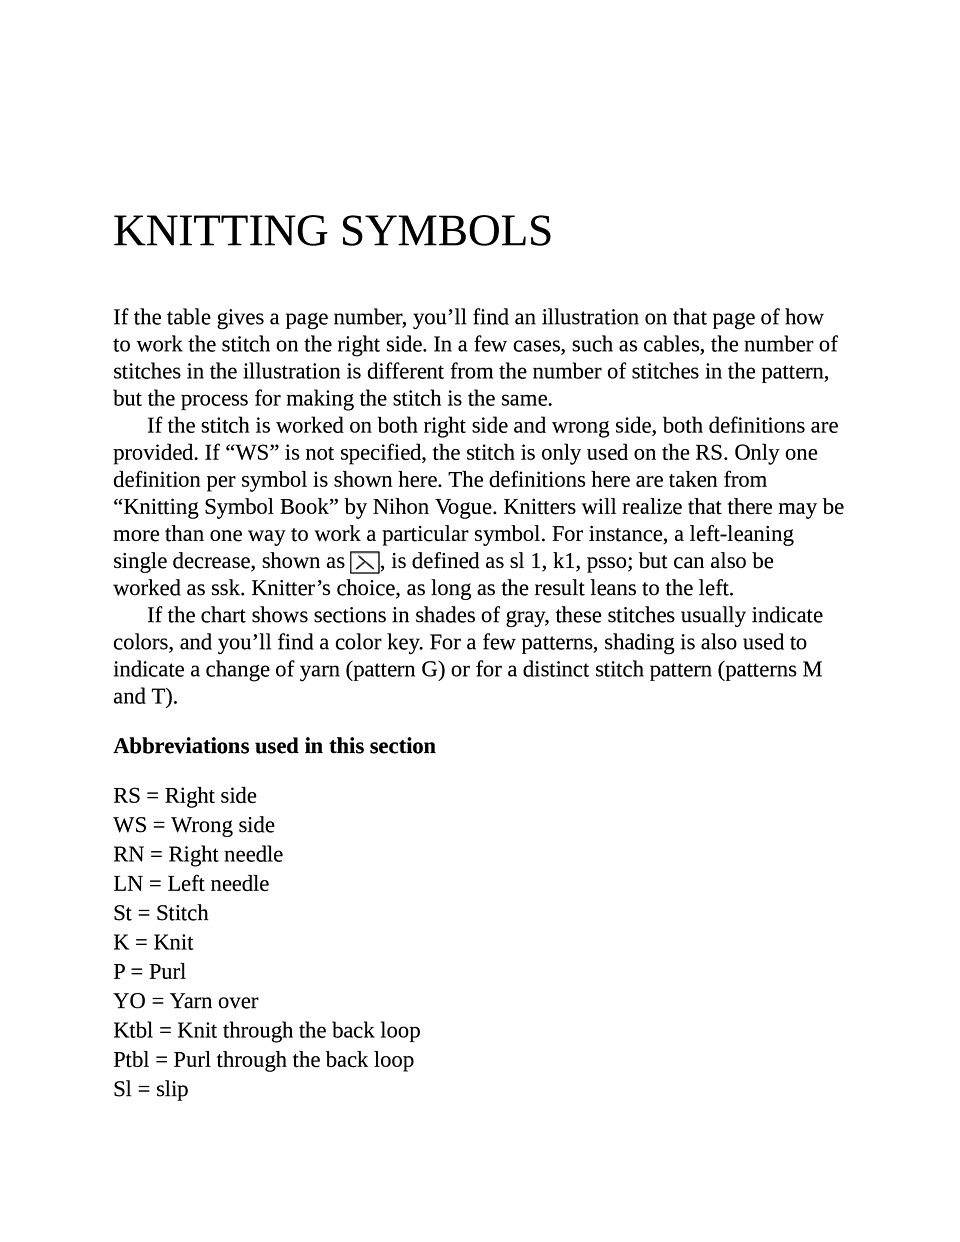 Japanese Knitting Patterns for Sweaters Scarves and More-26